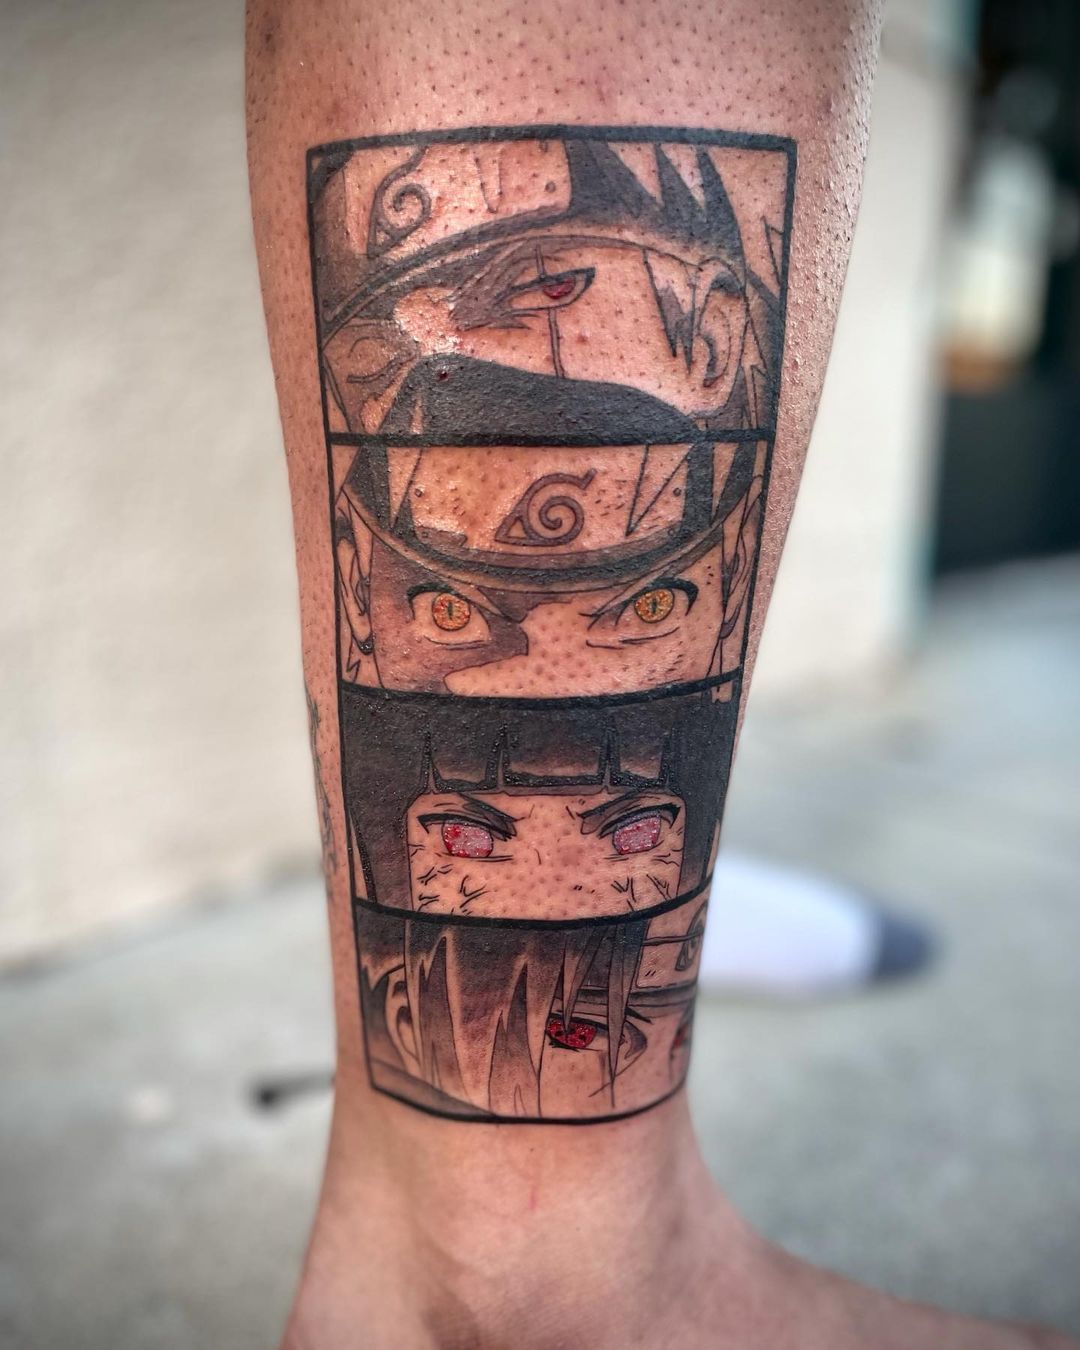 864 Likes 4 Comments  NeotradMangaAnime floreskr on Instagram  Naruto manga panel from the other day narutot  Anime tattoos Naruto  tattoo Manga tattoo